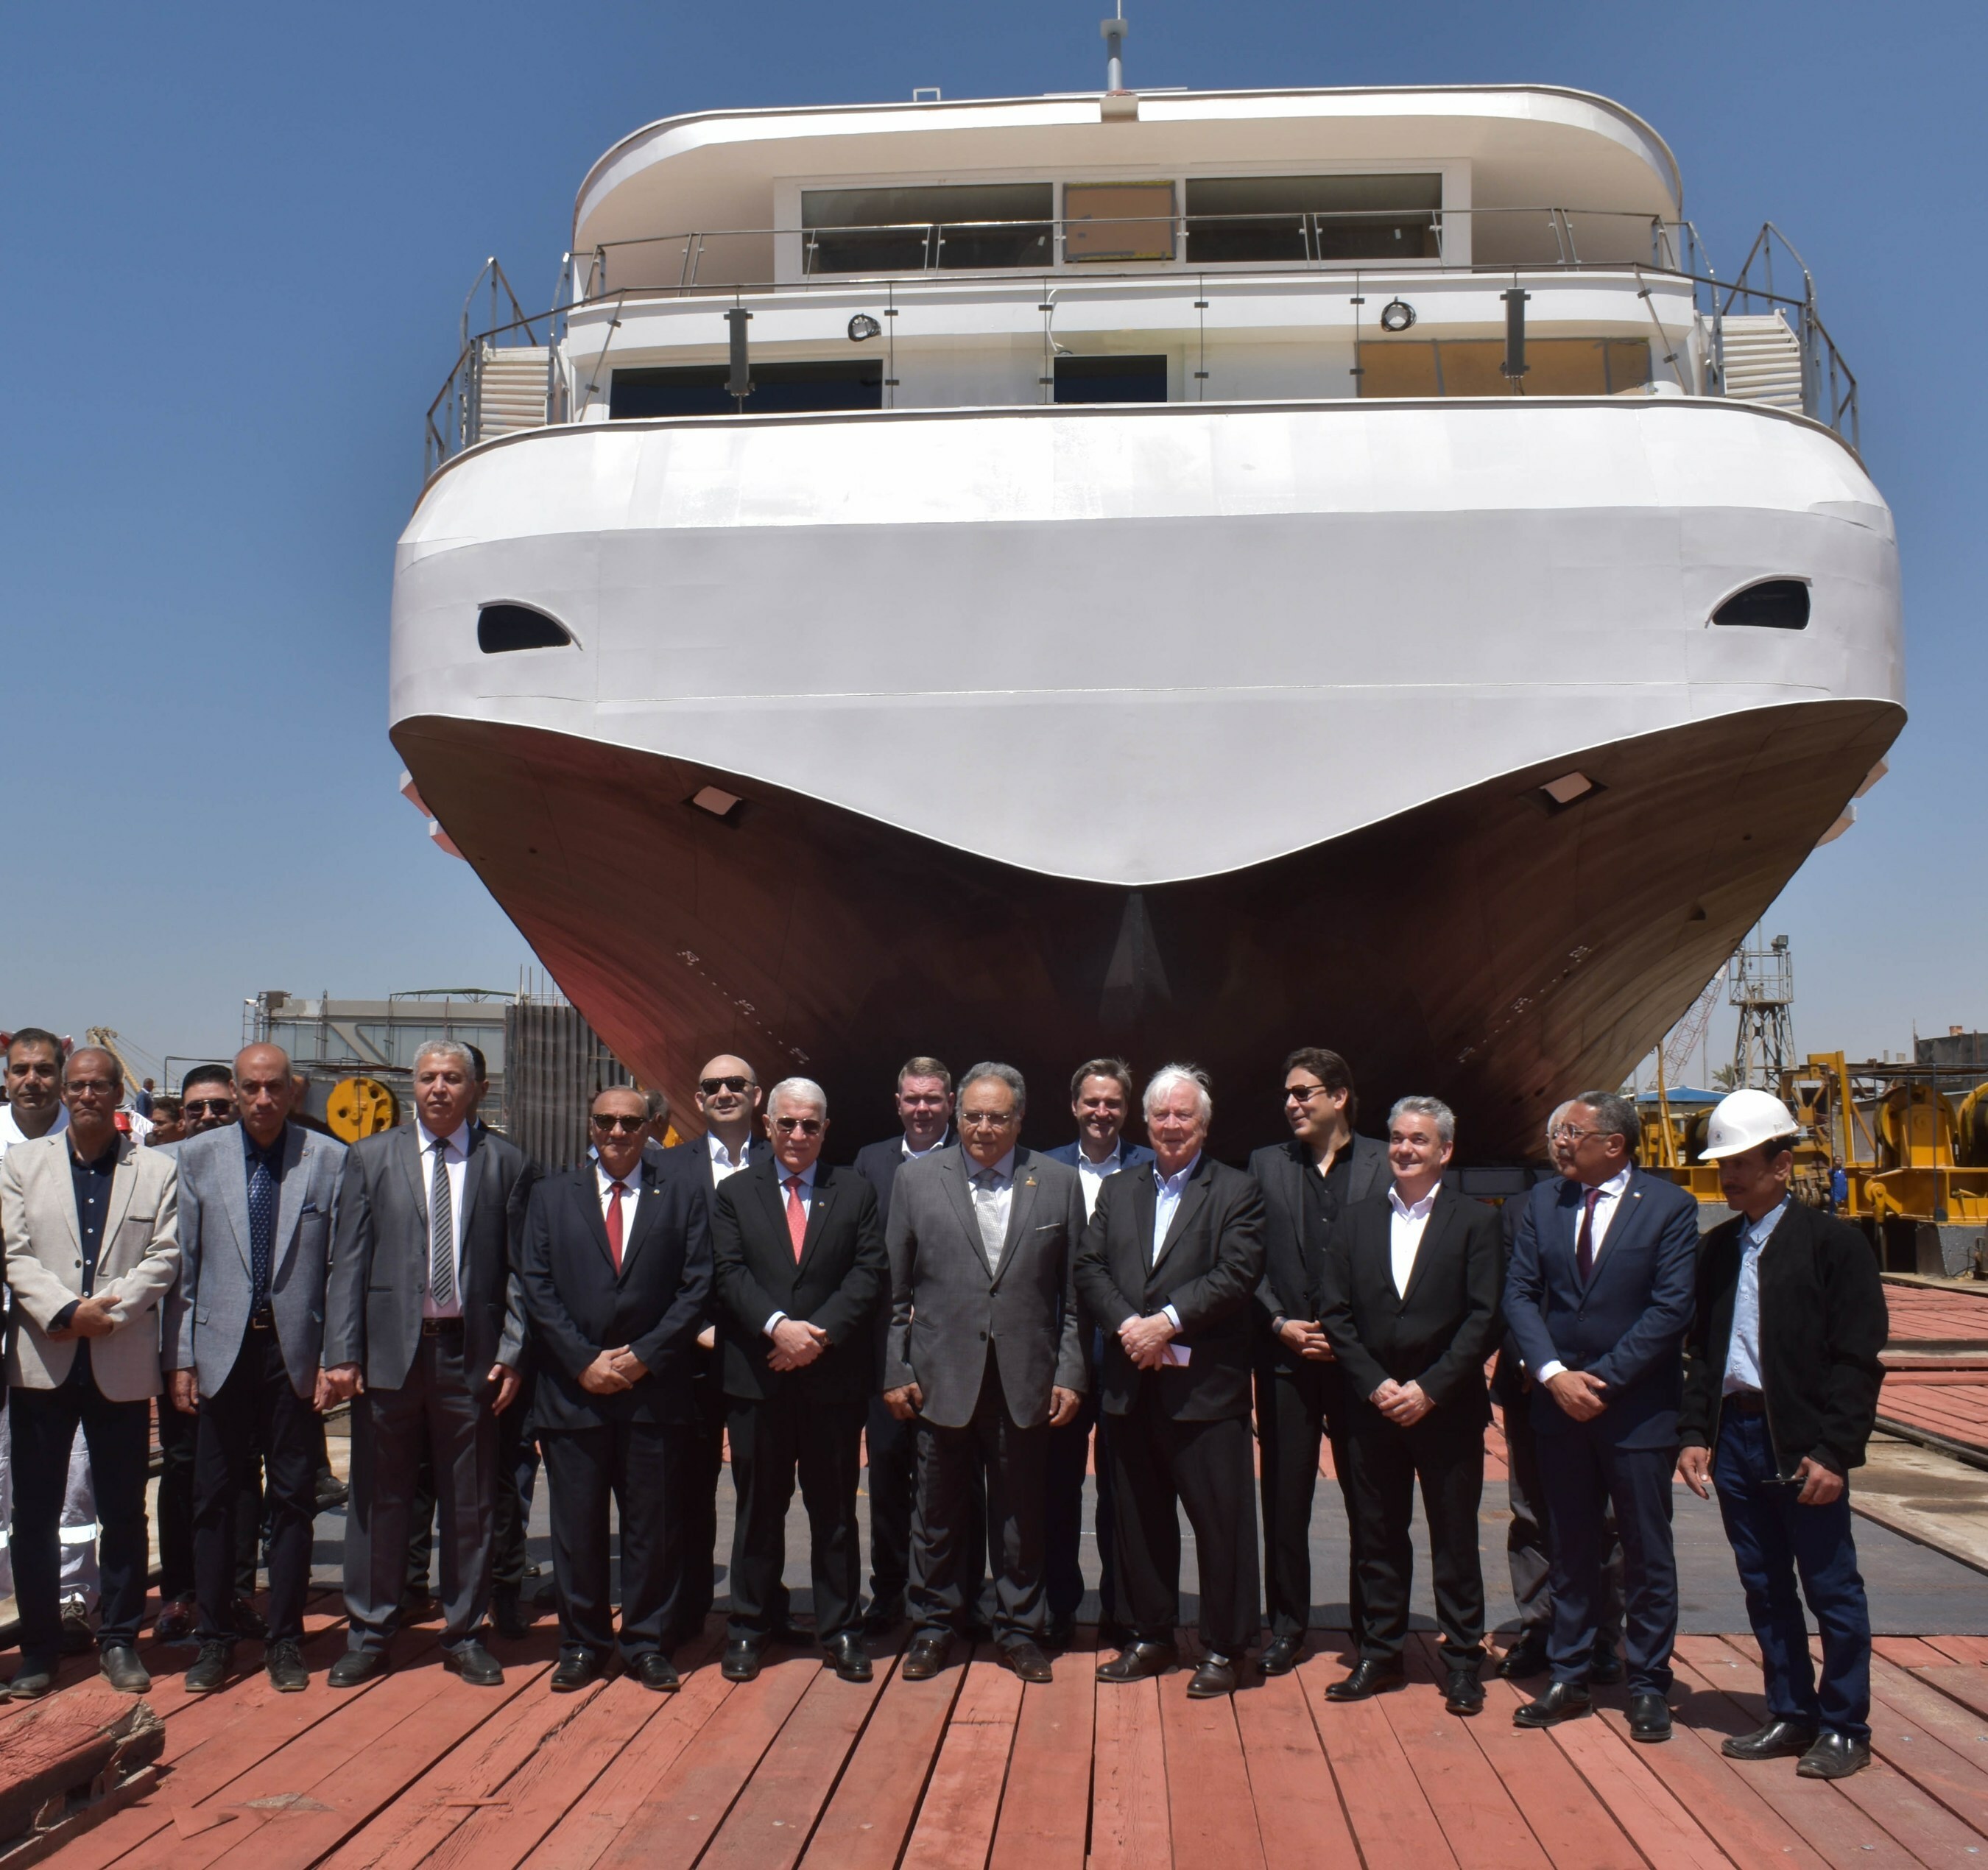 Viking Chairman Torstein Hagen (center) pictured with Sayed Farouk, Chairman of The Arab Contractors (Osman Ahmed Osman & Co.) and members of their teams at the Massara shipyard in Cairo during the float out ceremony of Viking’s newest ship for the Nile River. The 82-guest Viking Aton is set to debut in August 2023 and will sail Viking’s bestselling 12-day Pharaohs & Pyramids itinerary (Image at LateCruiseNews.com - April 2023)